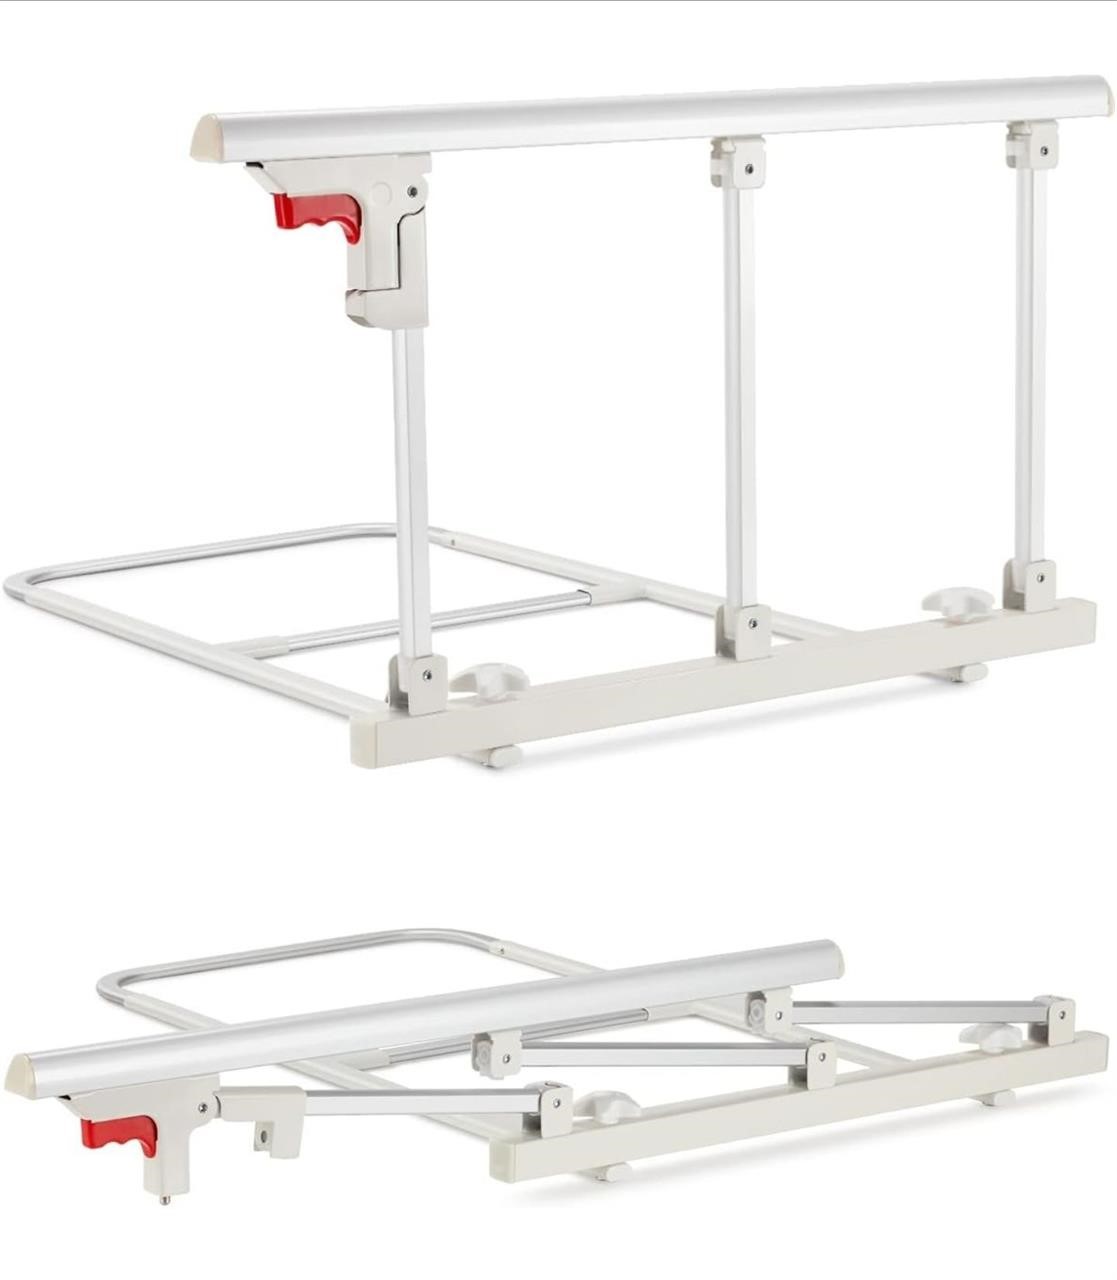 ($156) OasisSpace Bed Safety Rail - Folding